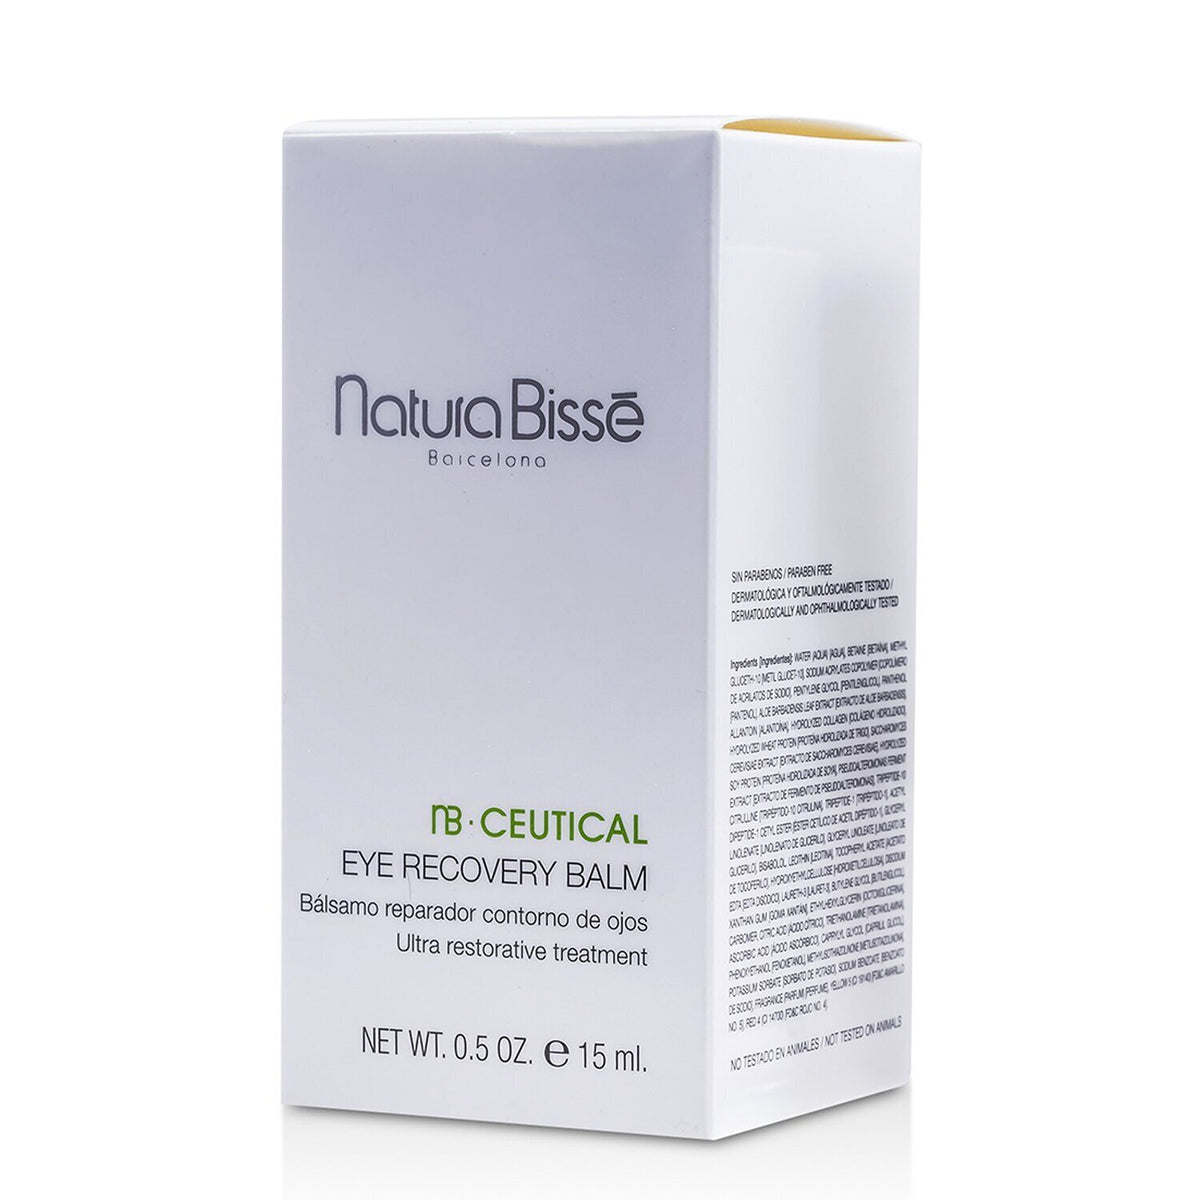 NB Ceutical Eye Recovery Balm for Sale | Natura Bisse, Skincare, Buy Now –  Author